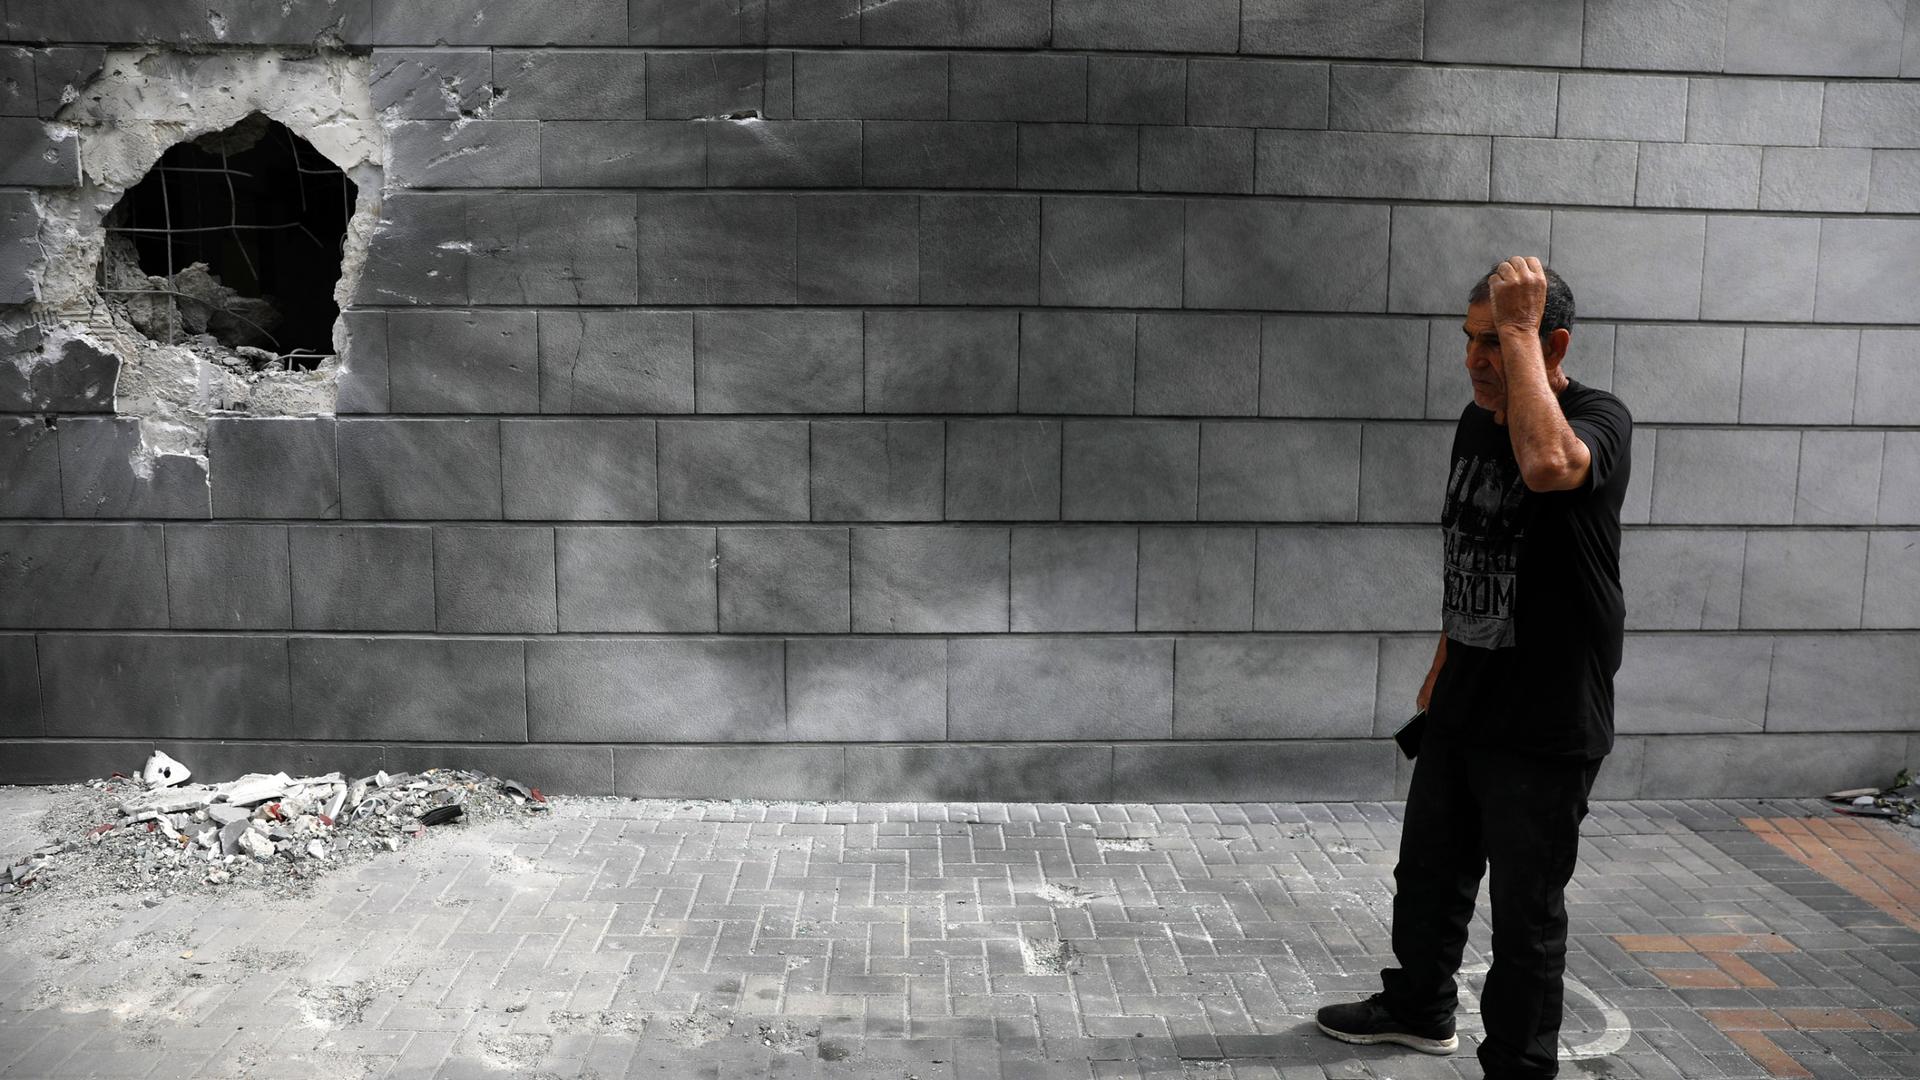 A man is show wearing a black t-shirt and pants while standing next to a cinder block wall with a large hole in it.